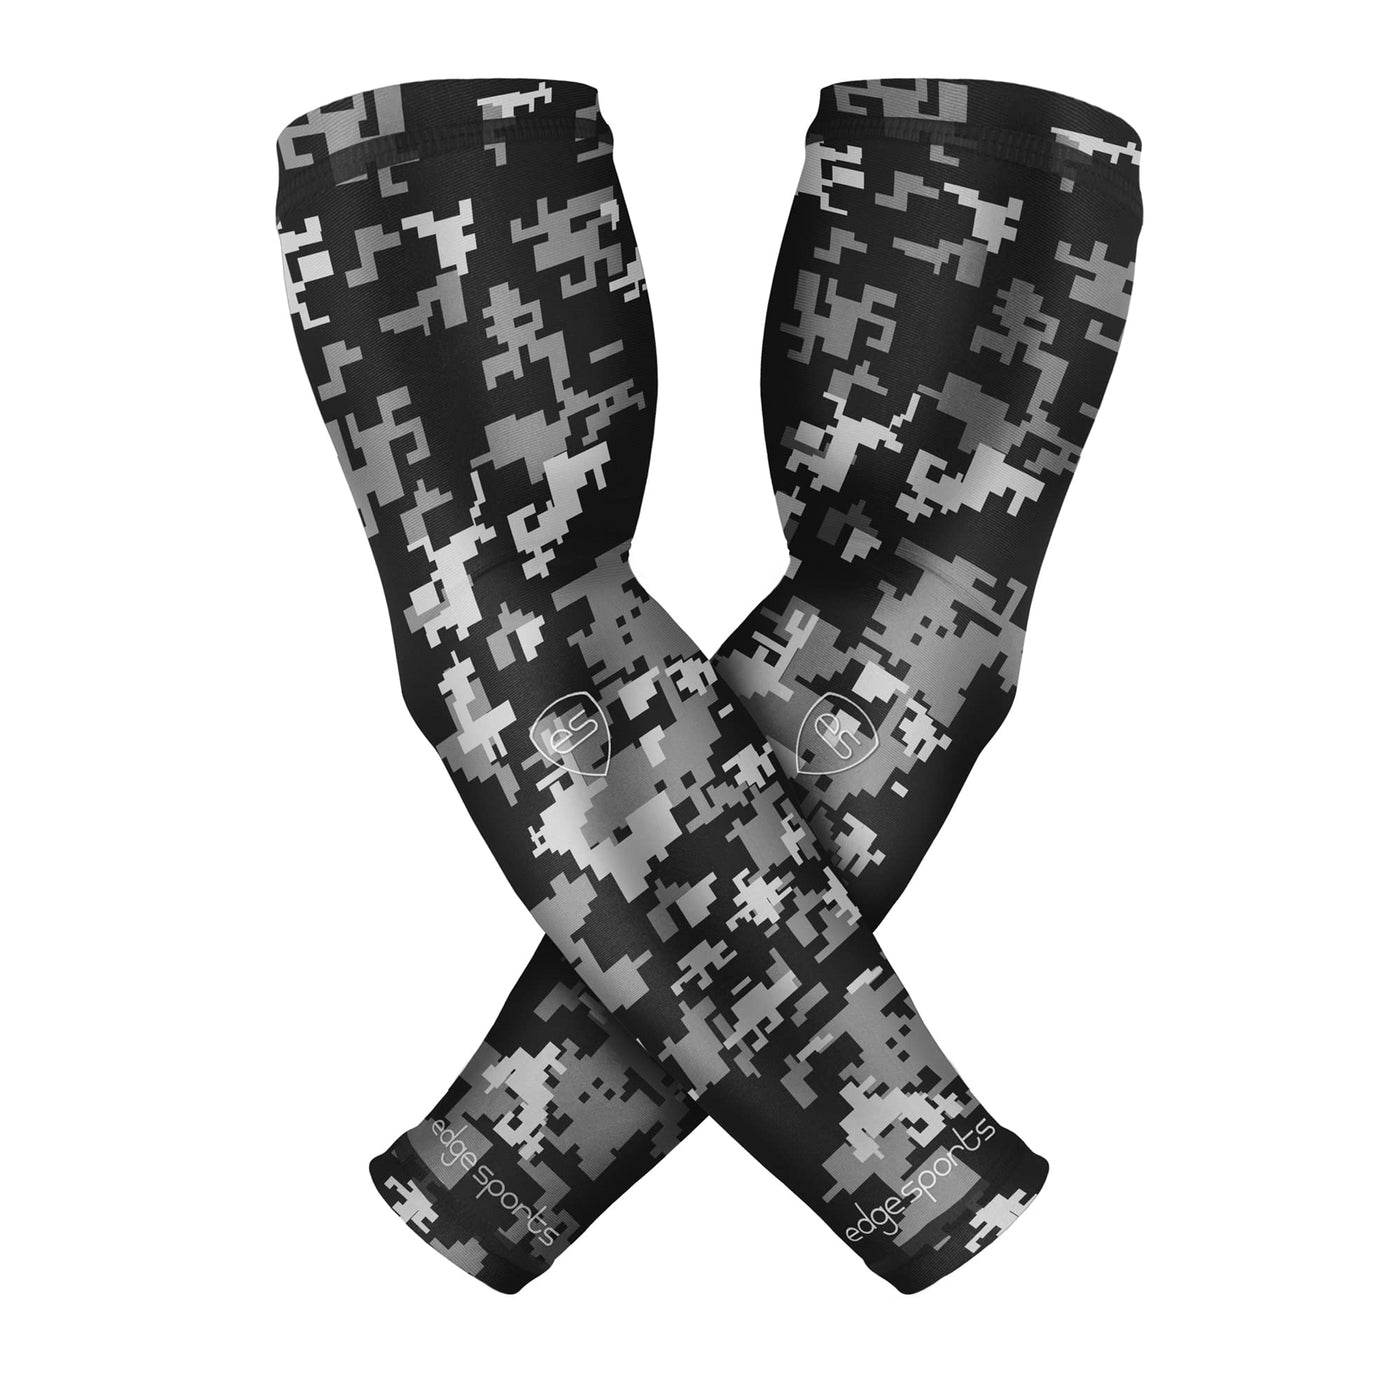 Football Arm Sleeves, Compression Sleeves for all Performance